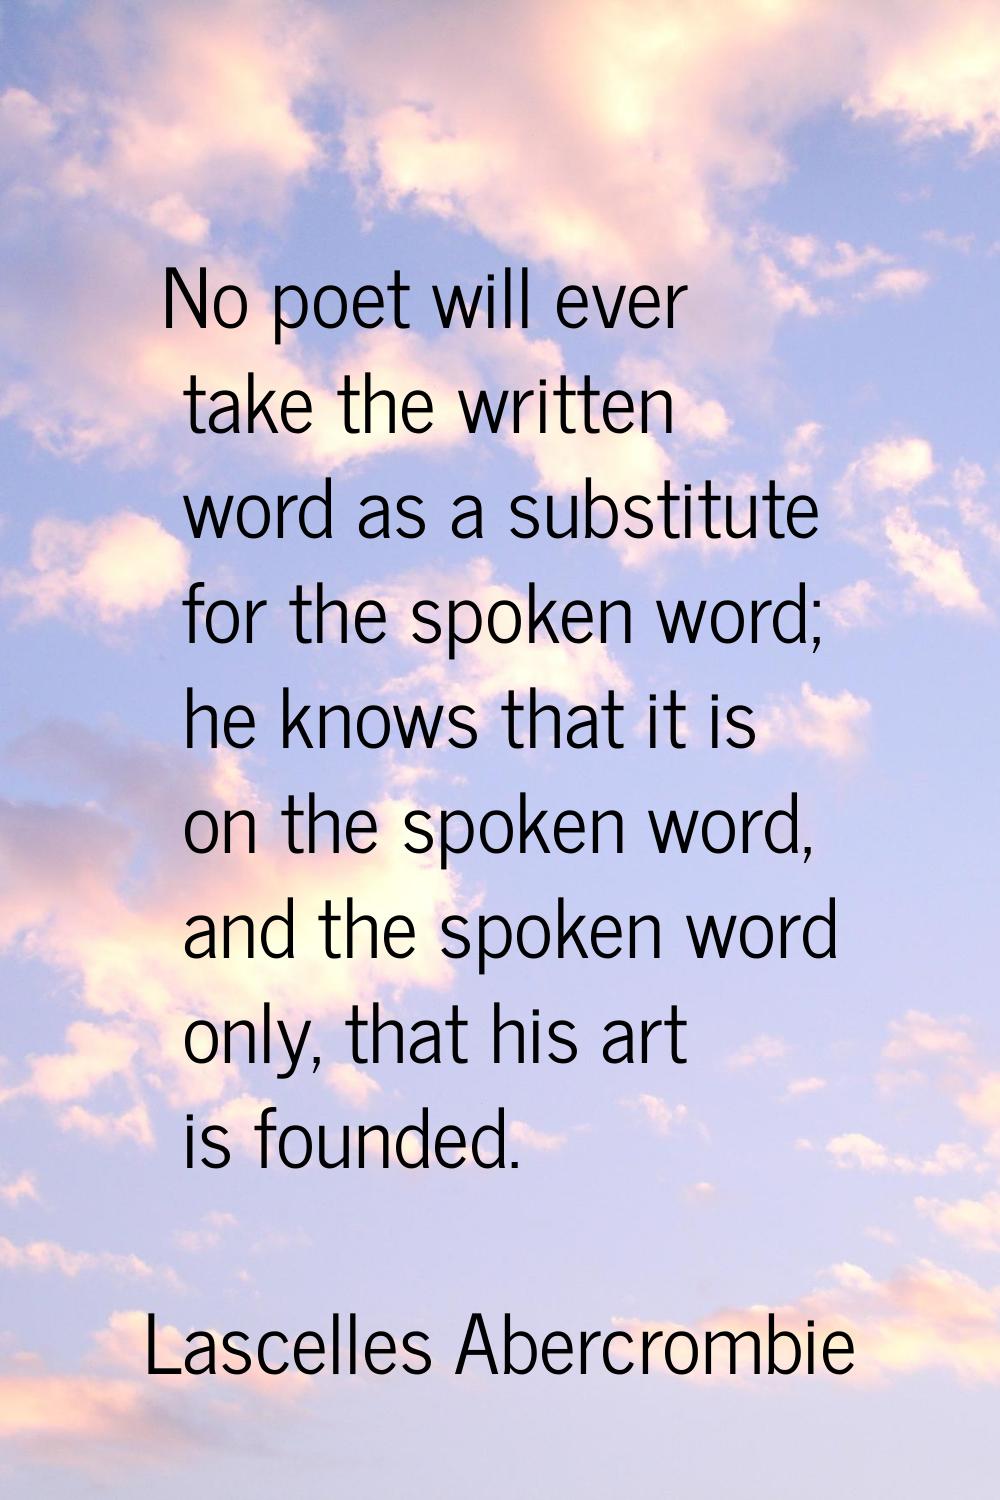 No poet will ever take the written word as a substitute for the spoken word; he knows that it is on